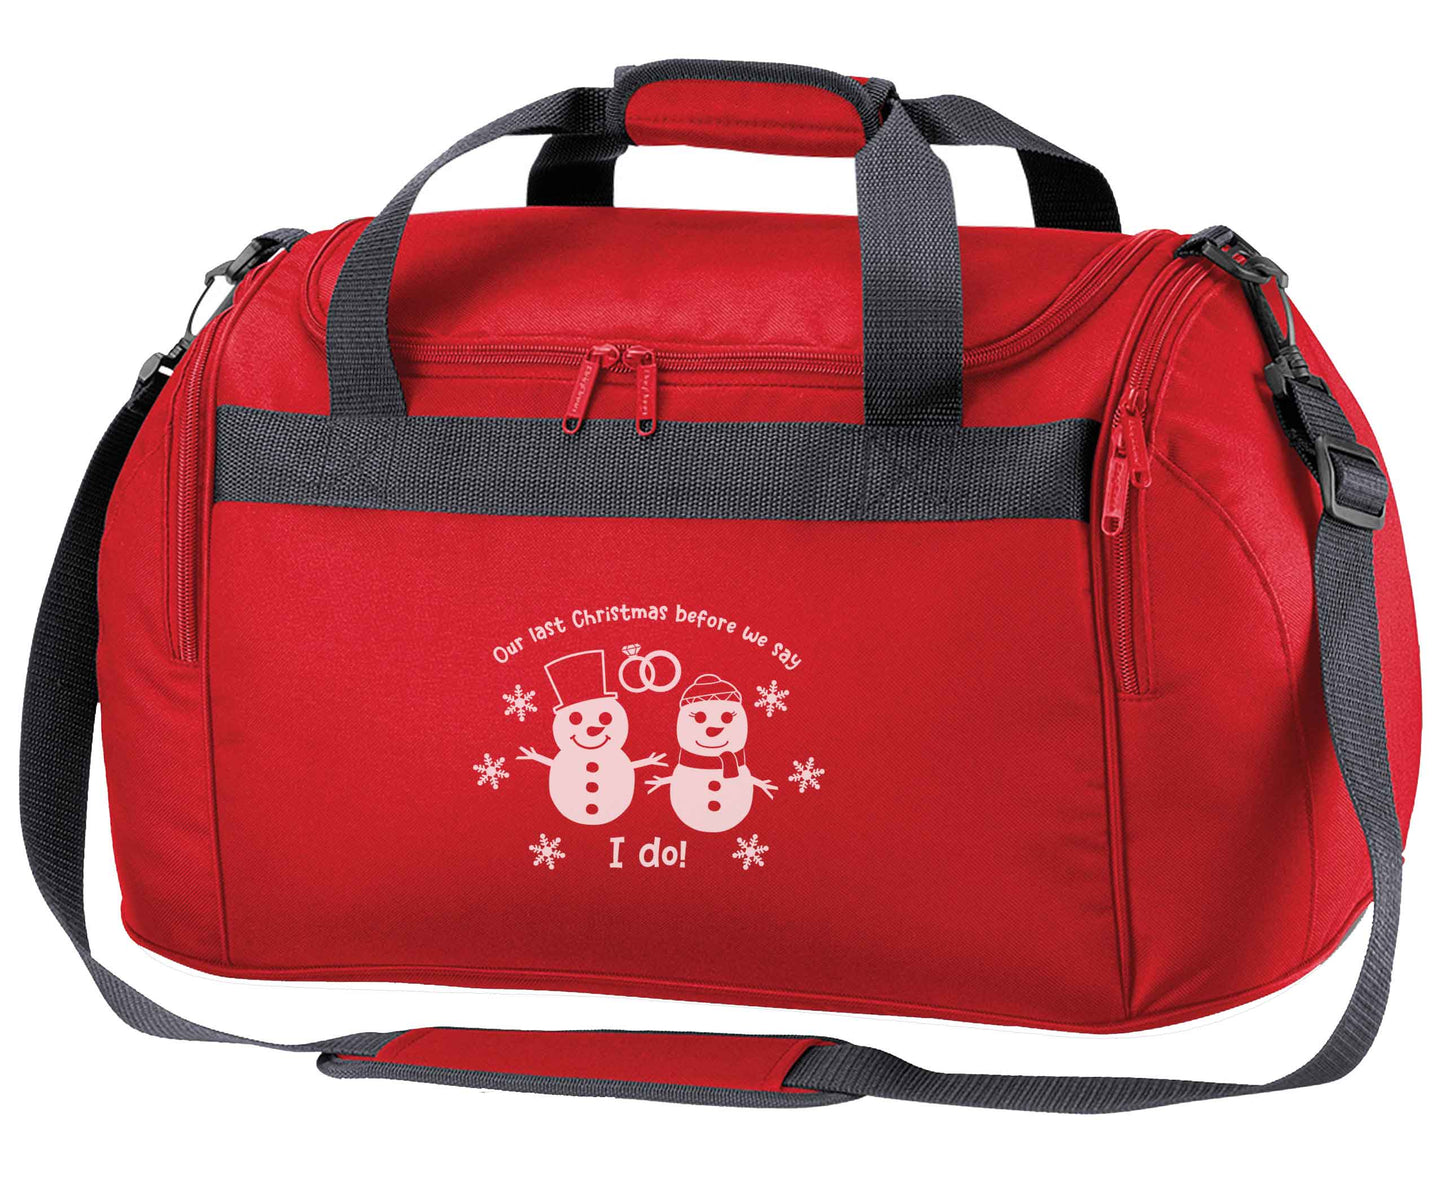 Last Christmas before we say I do red holdall / duffel bag